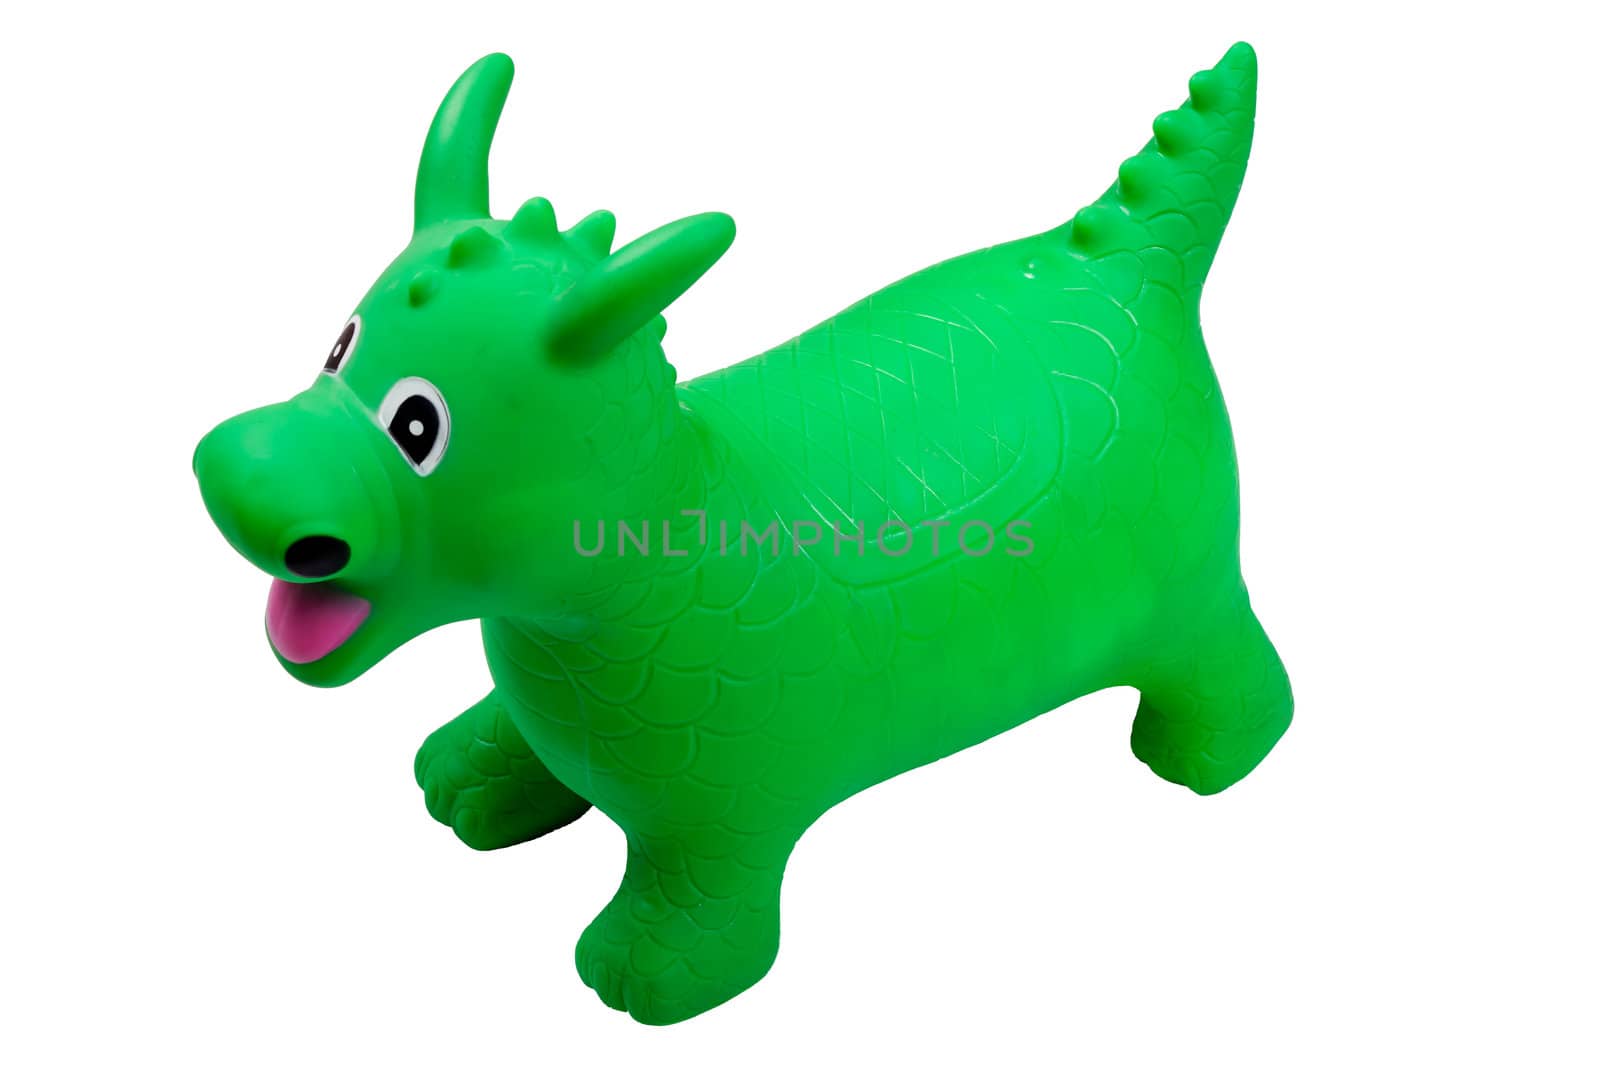 A green inflatable toy dragon for riding. Isolated on white